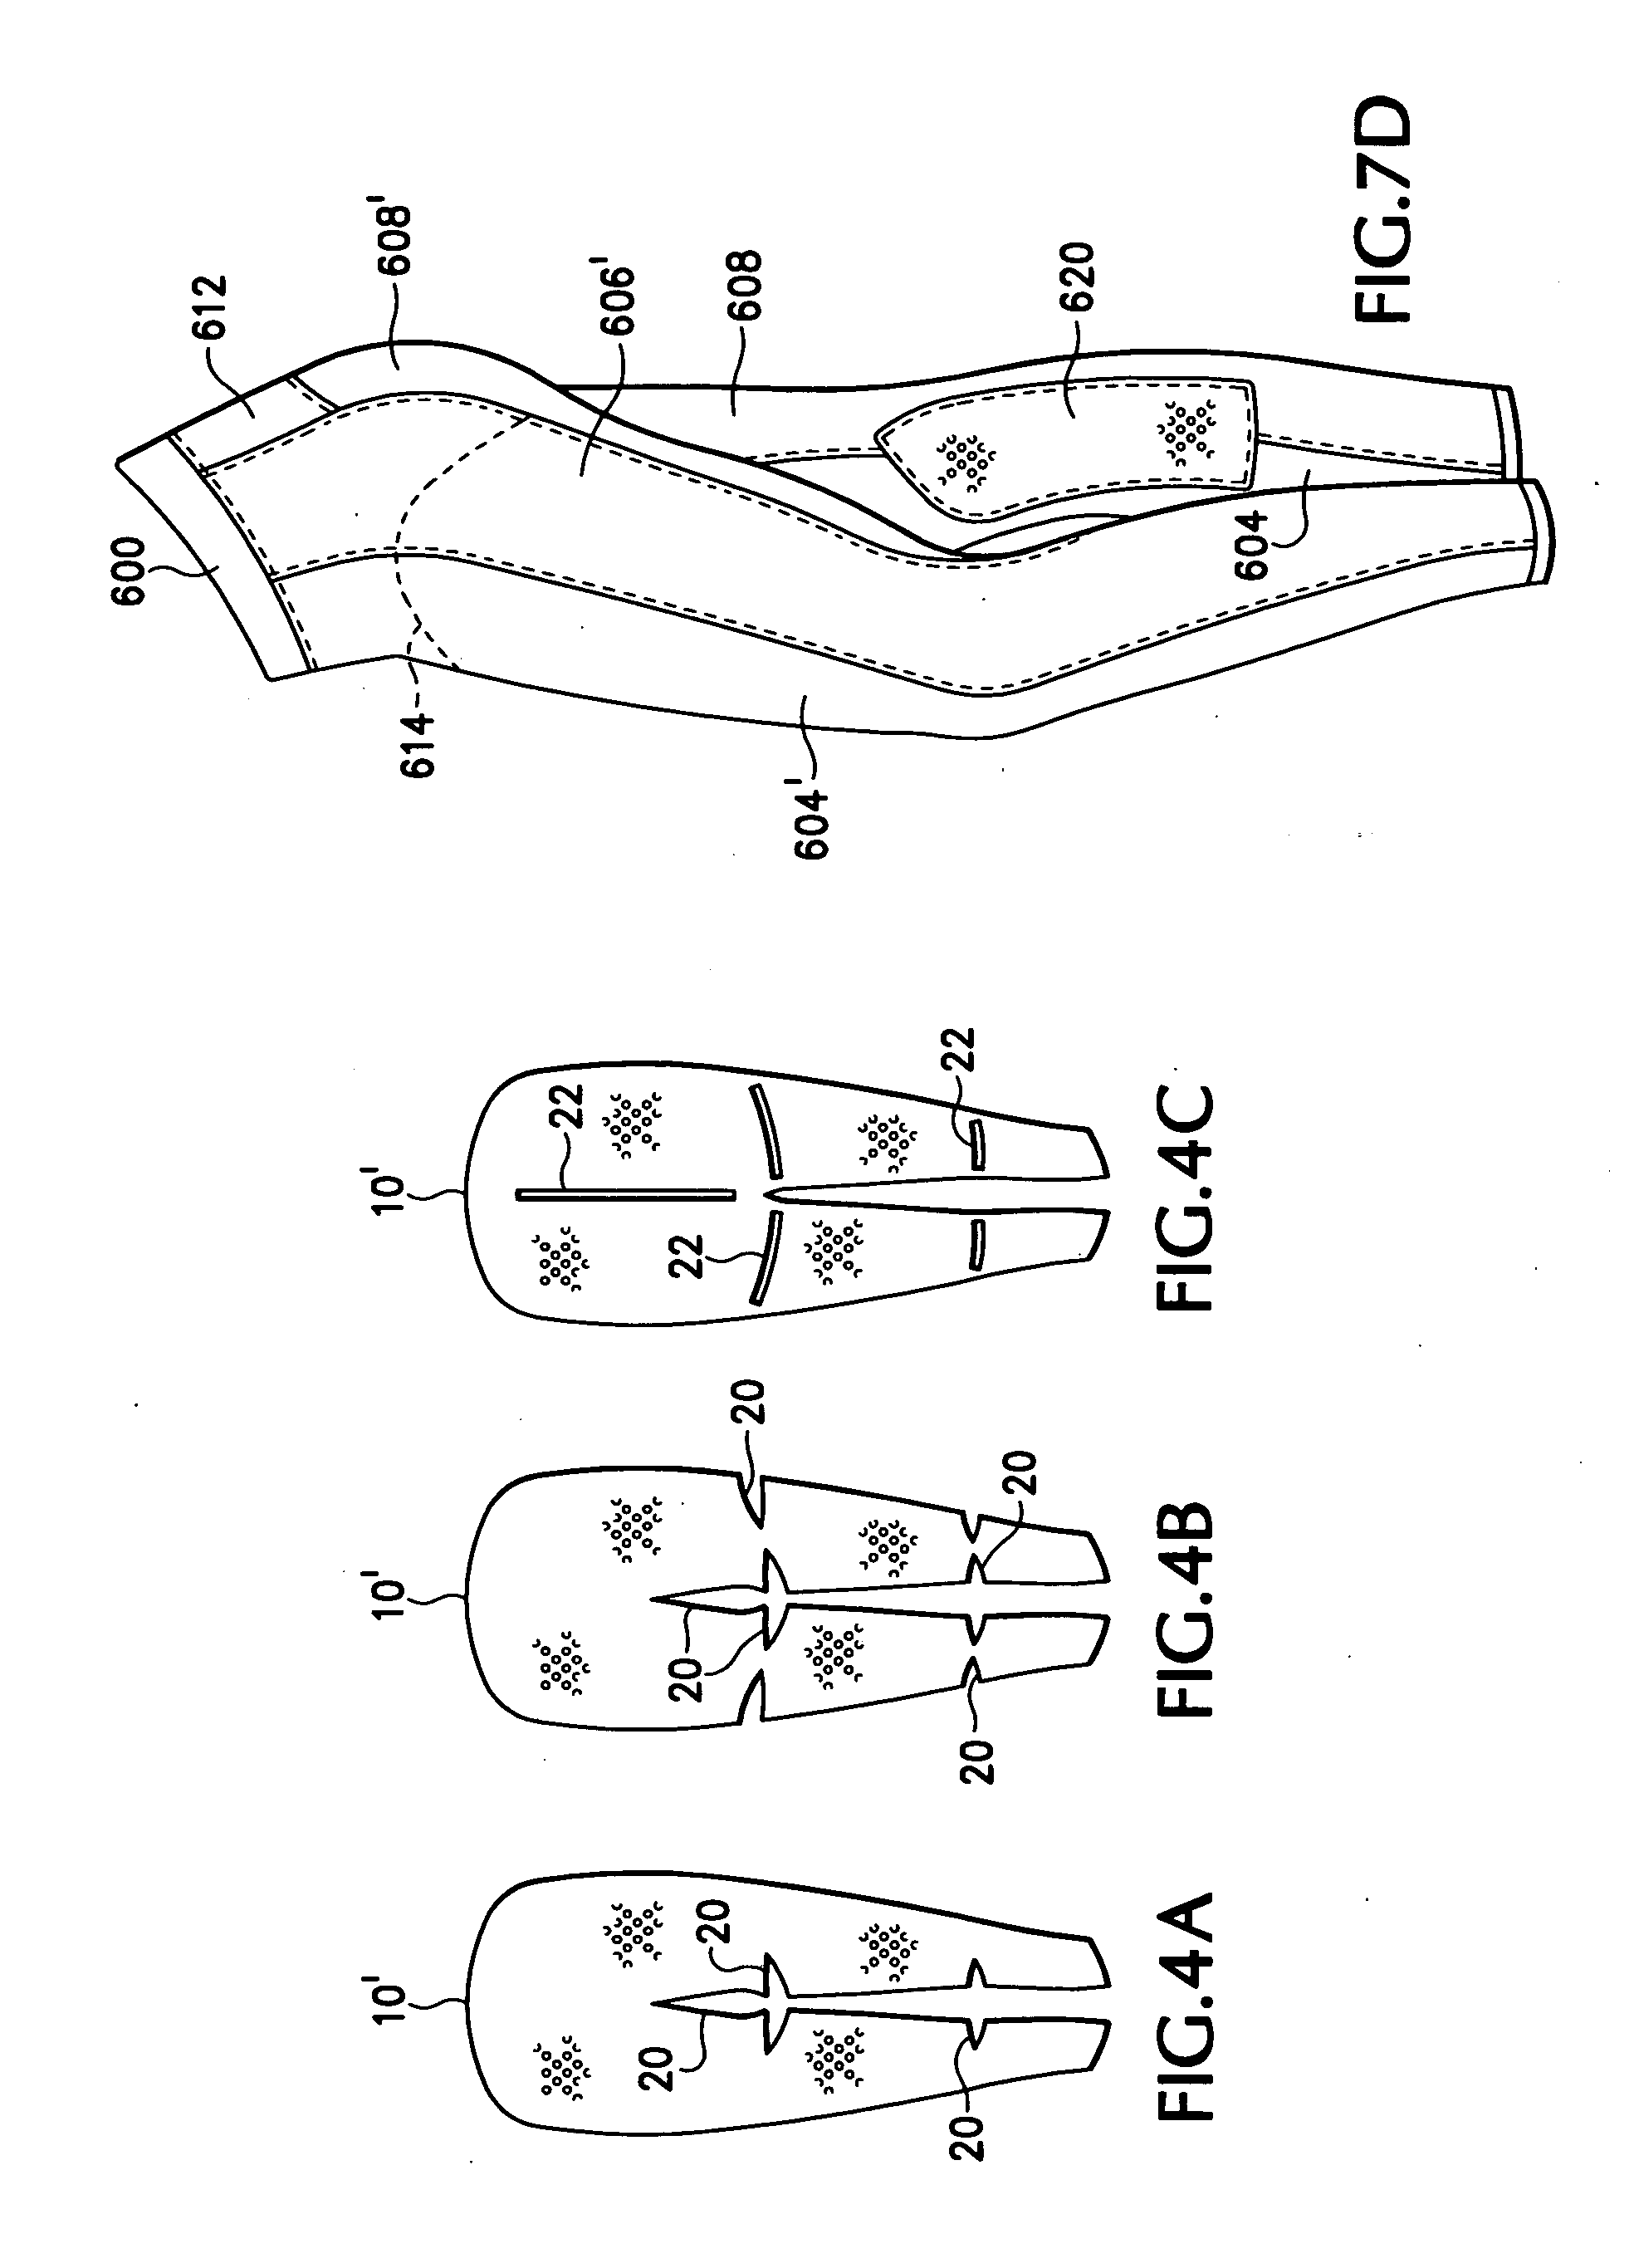 Equestrian riding breeches garment and method for its manufacture